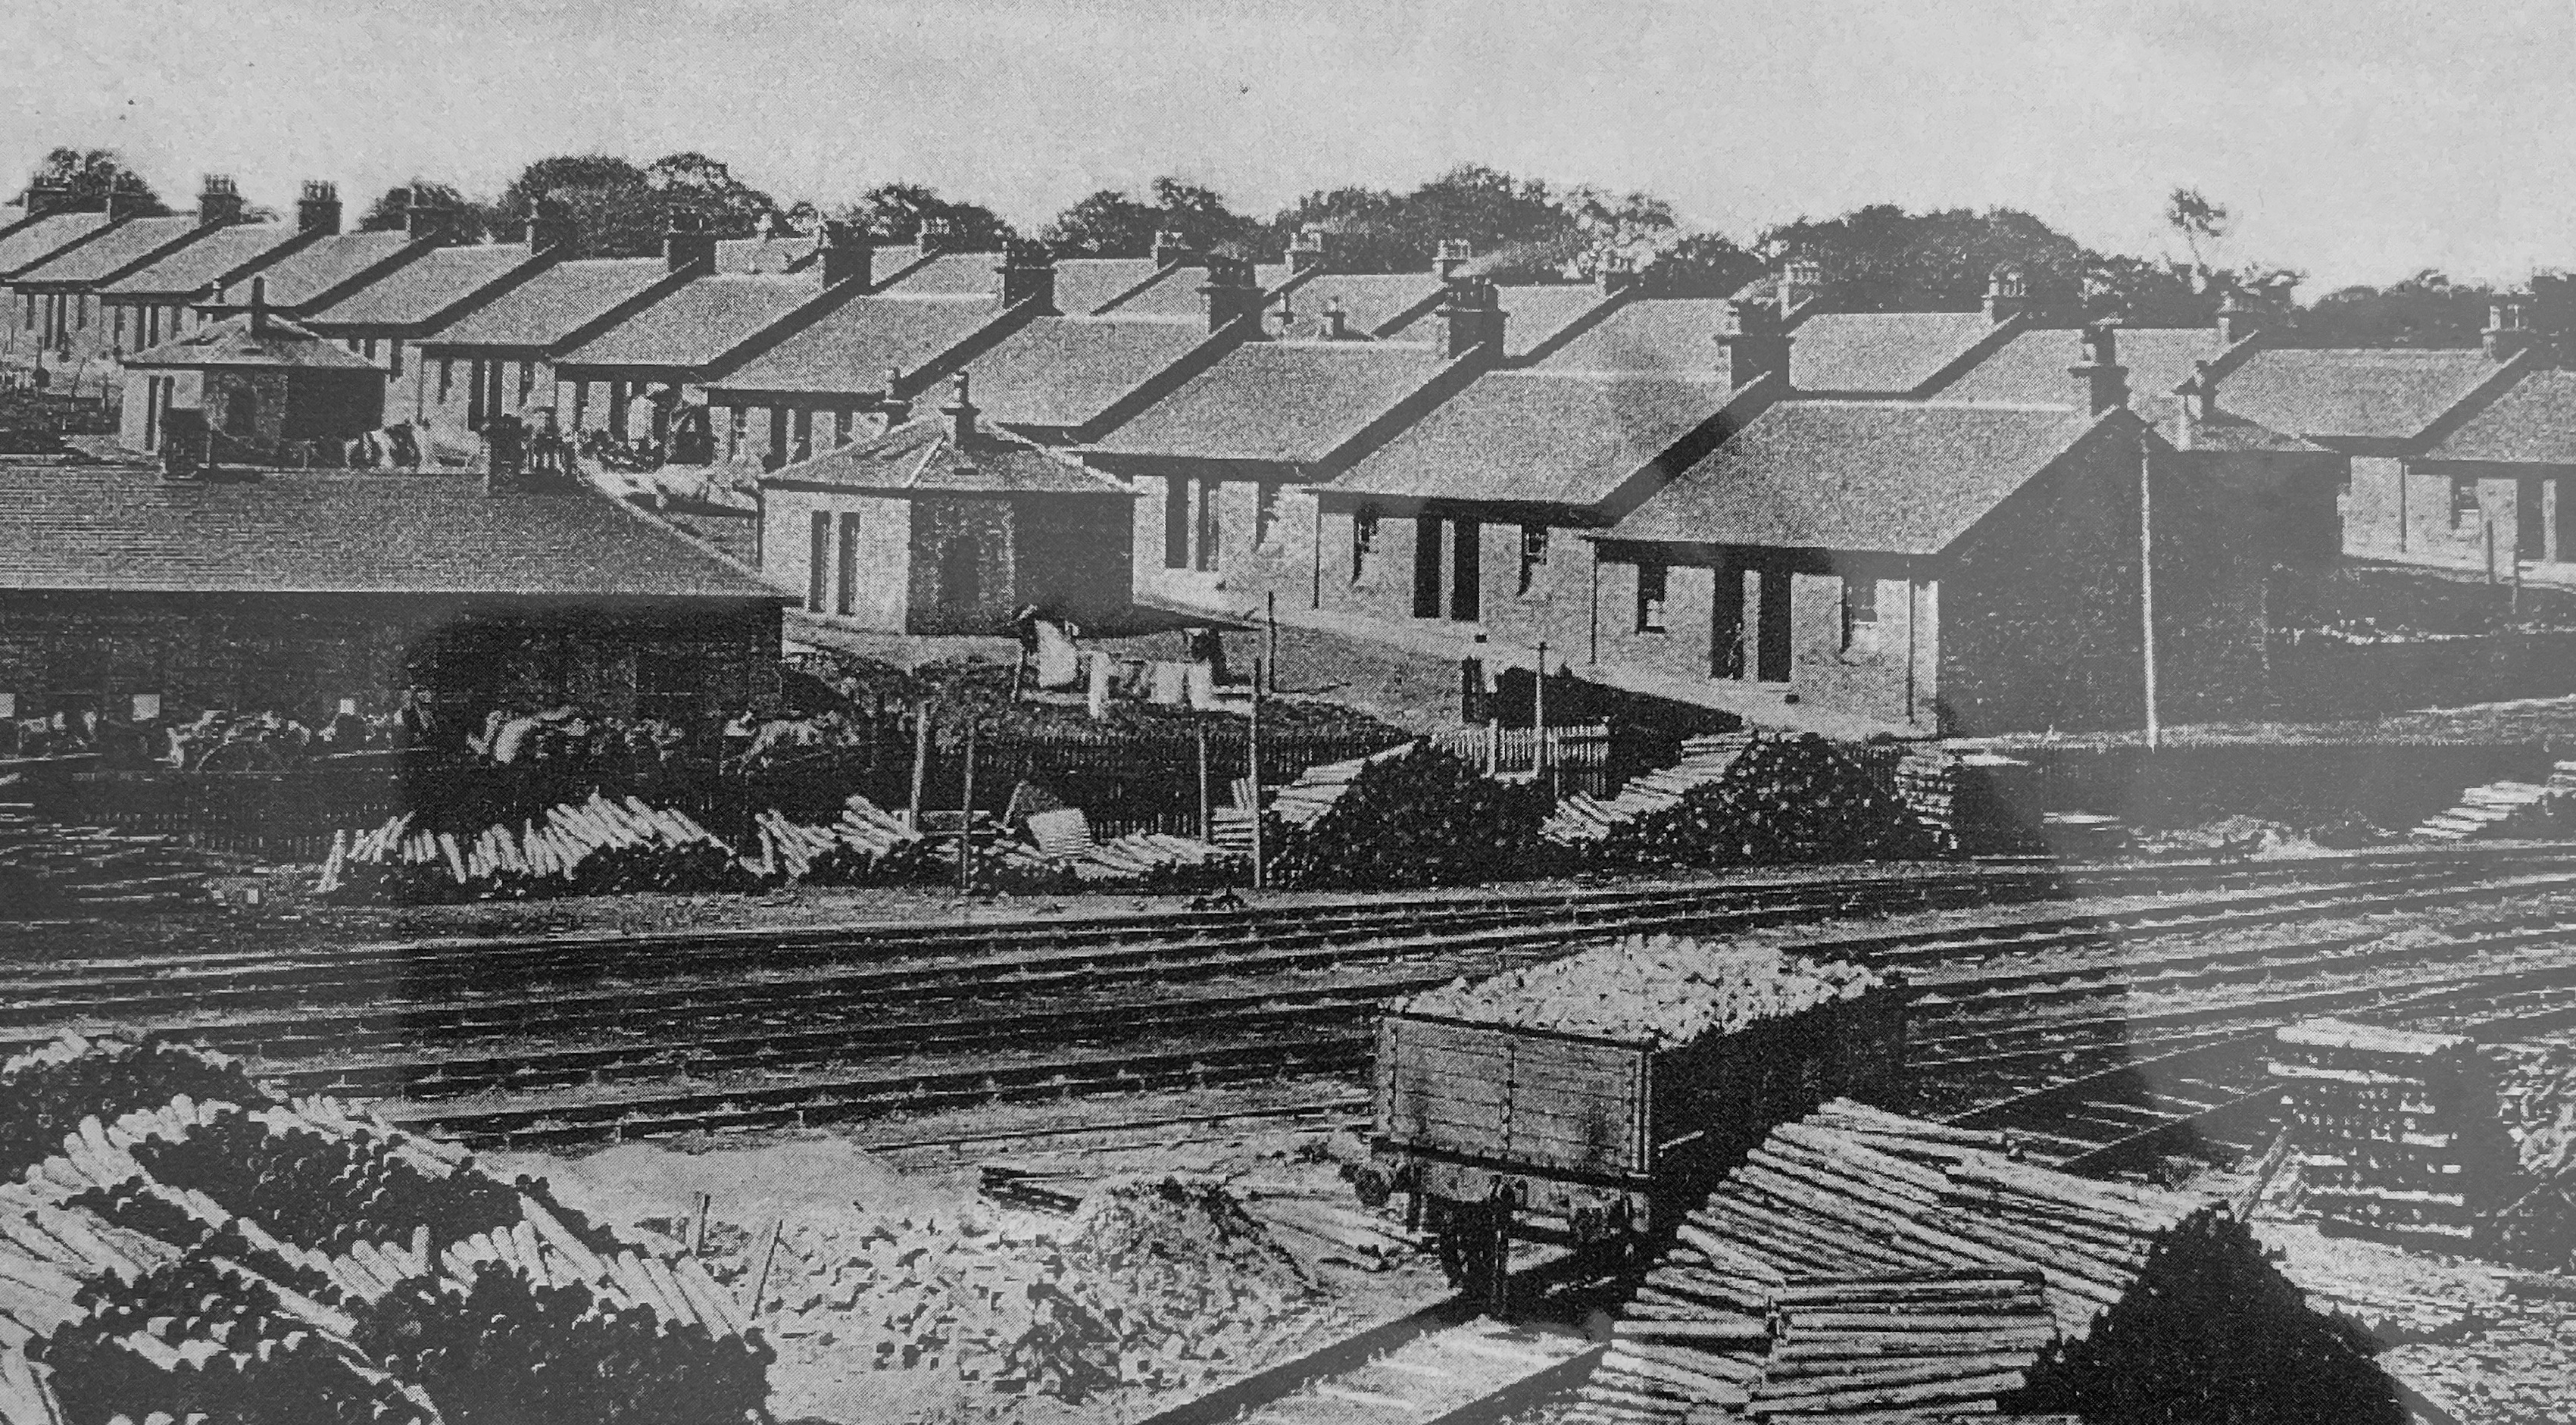 black and white photograph of two row of single storey brick houses with railways tracks in the foreground